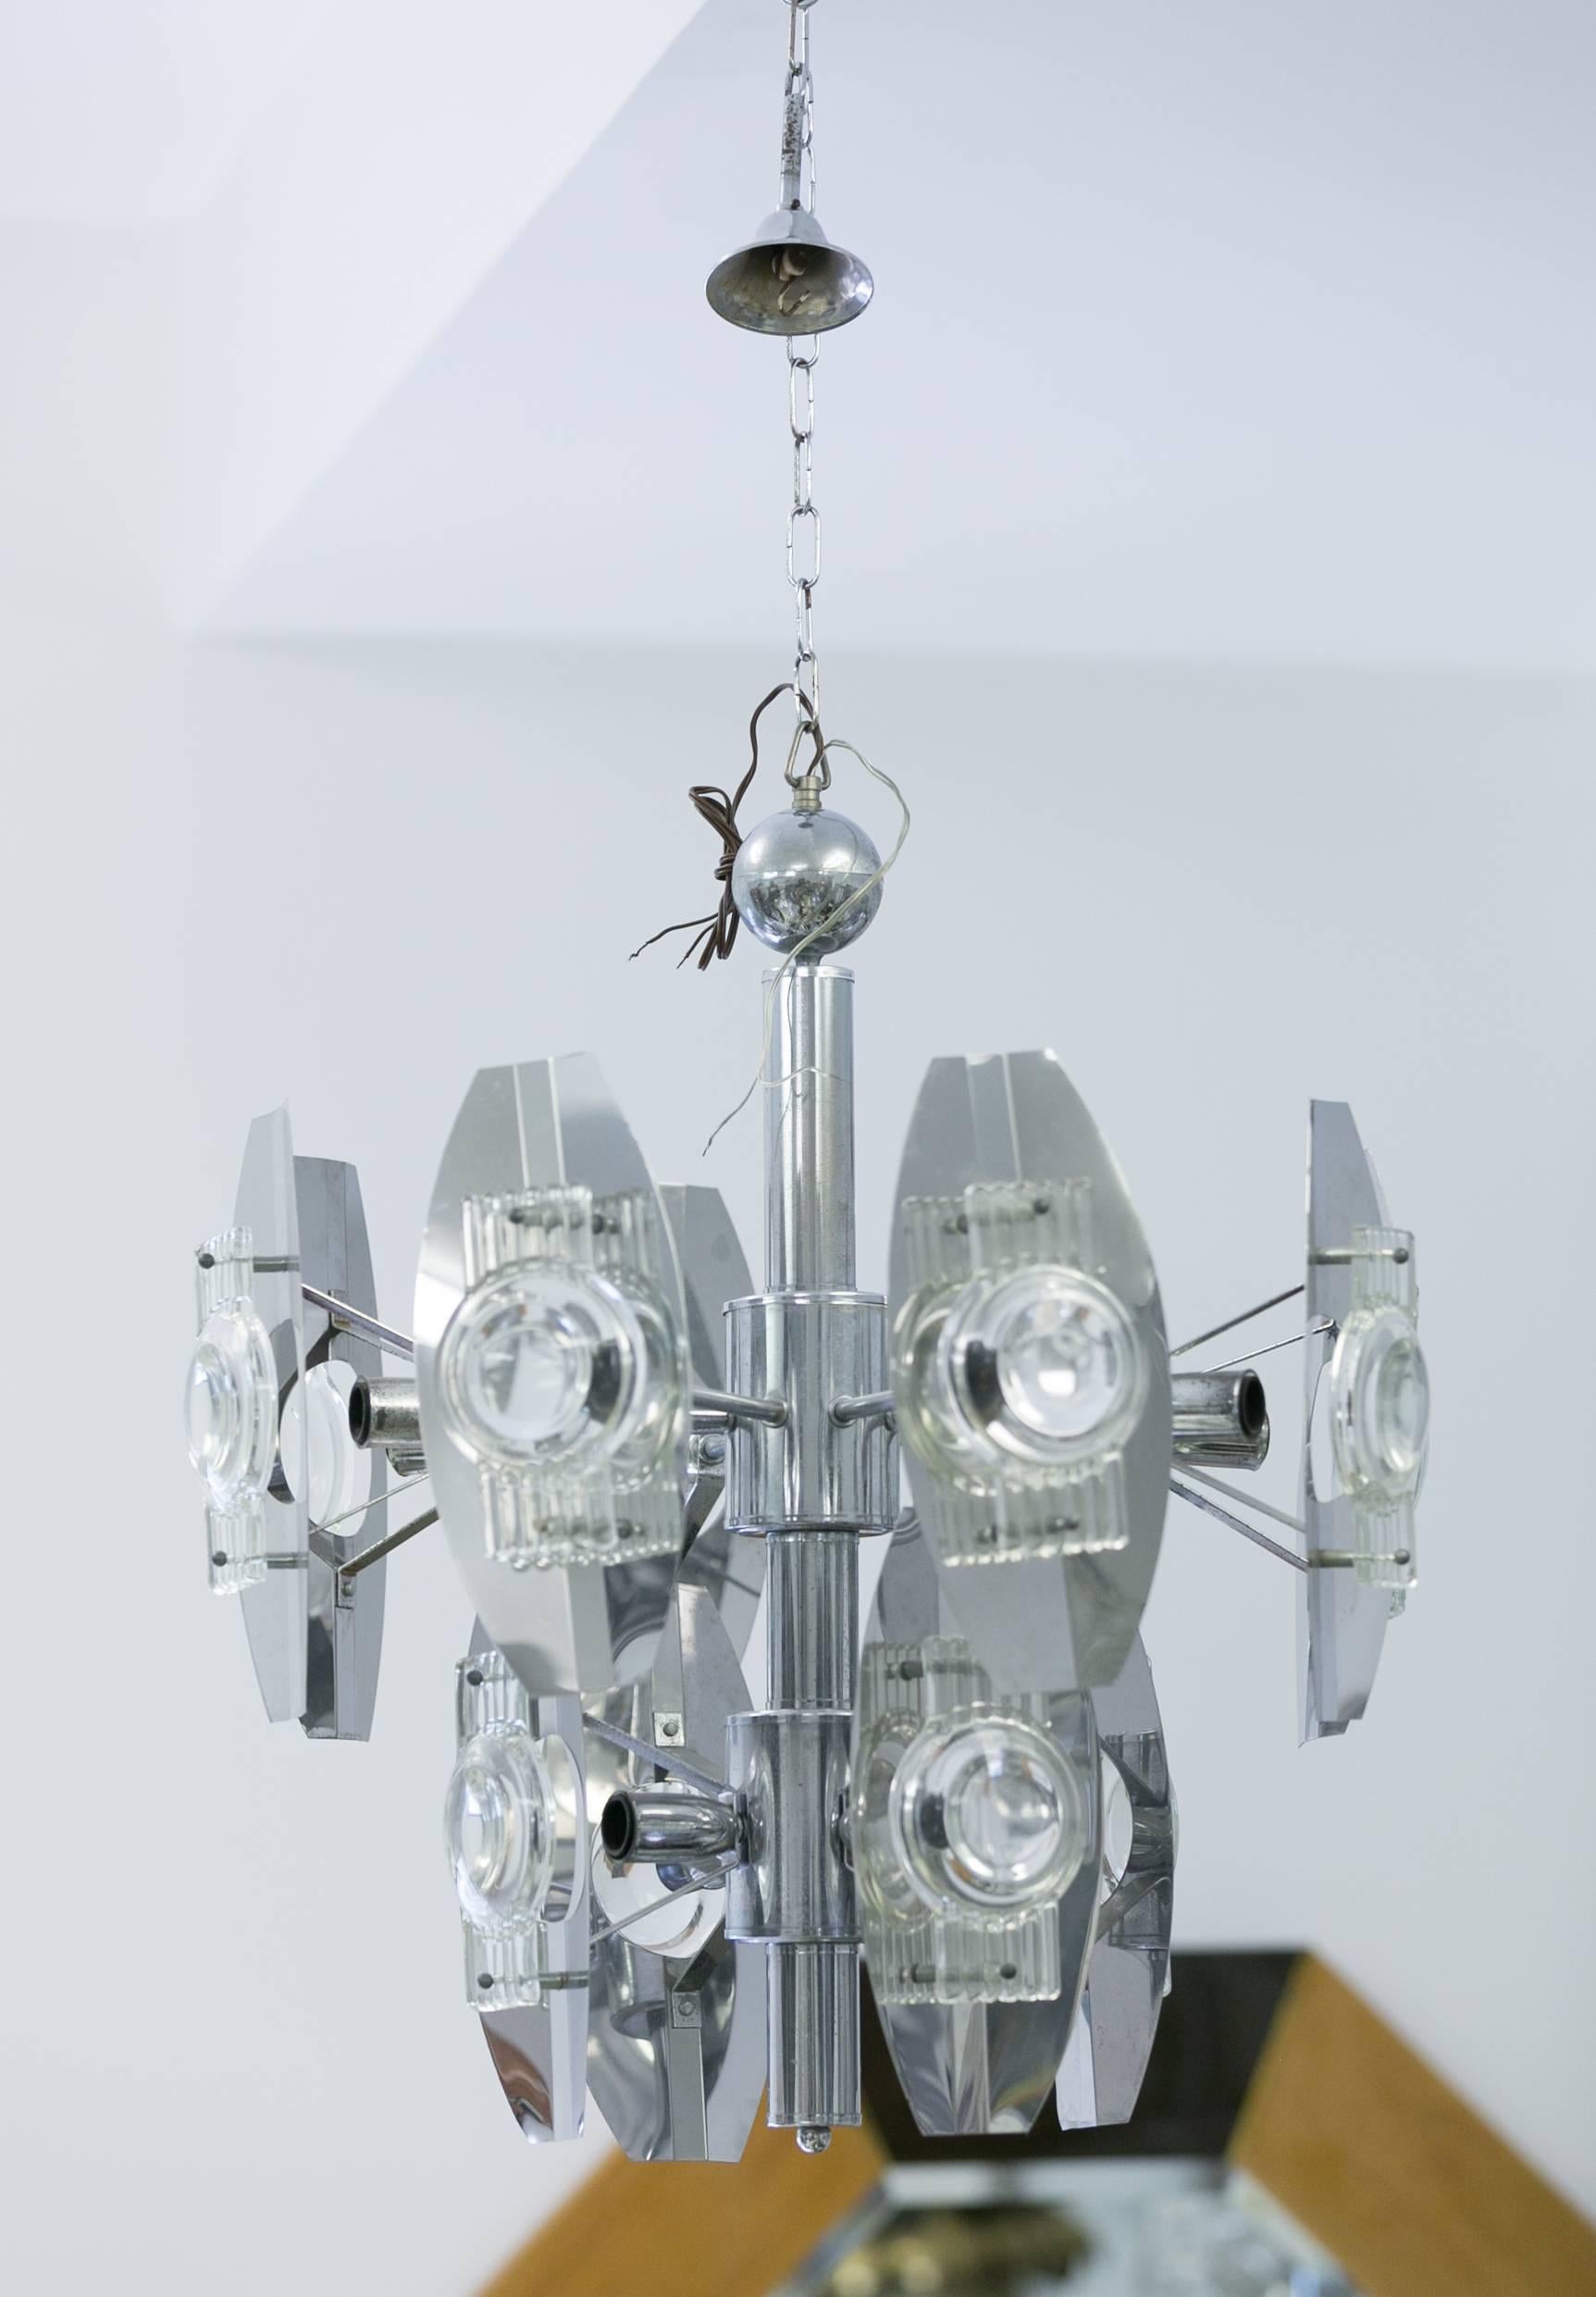 Twelve-light Chrome Chandelier in Oscar Torlasco style
with optical Murano glass reflectors attached
to chrome screens mounted on center 
rod with a ball at top.
Labeled.